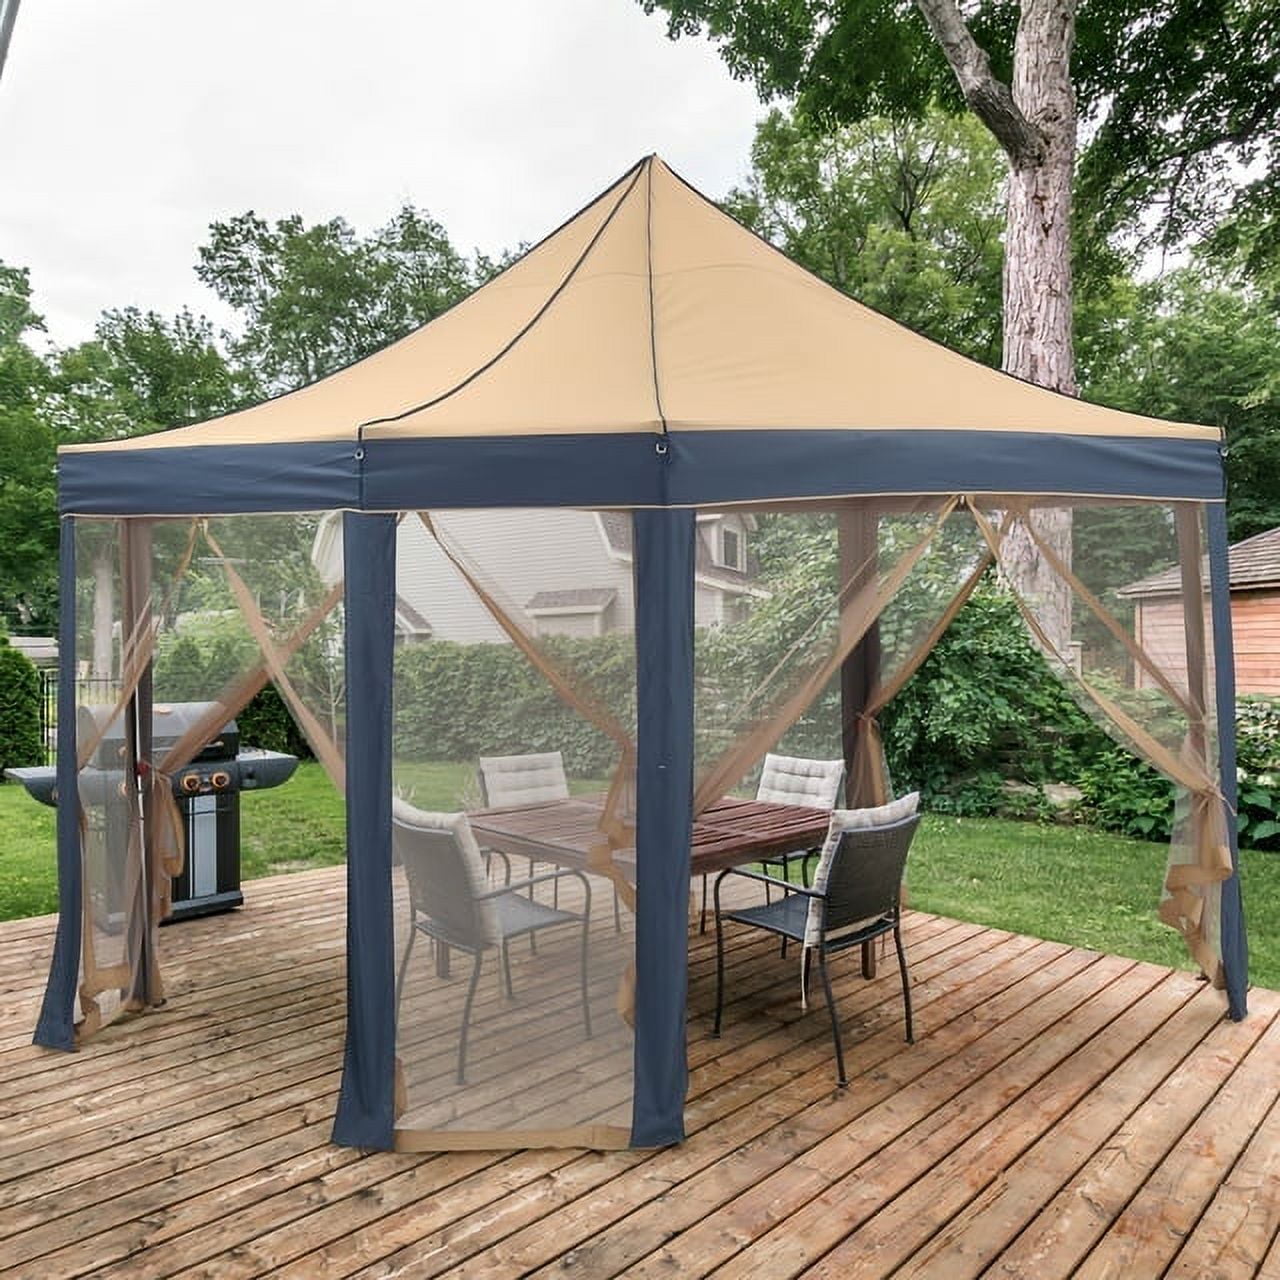 Ainfox 10' x 13'  Pop up Gazebo Canopy Portable Outdoor Backyard Tent with Mosquito Netting $99.99 + Free Shipping